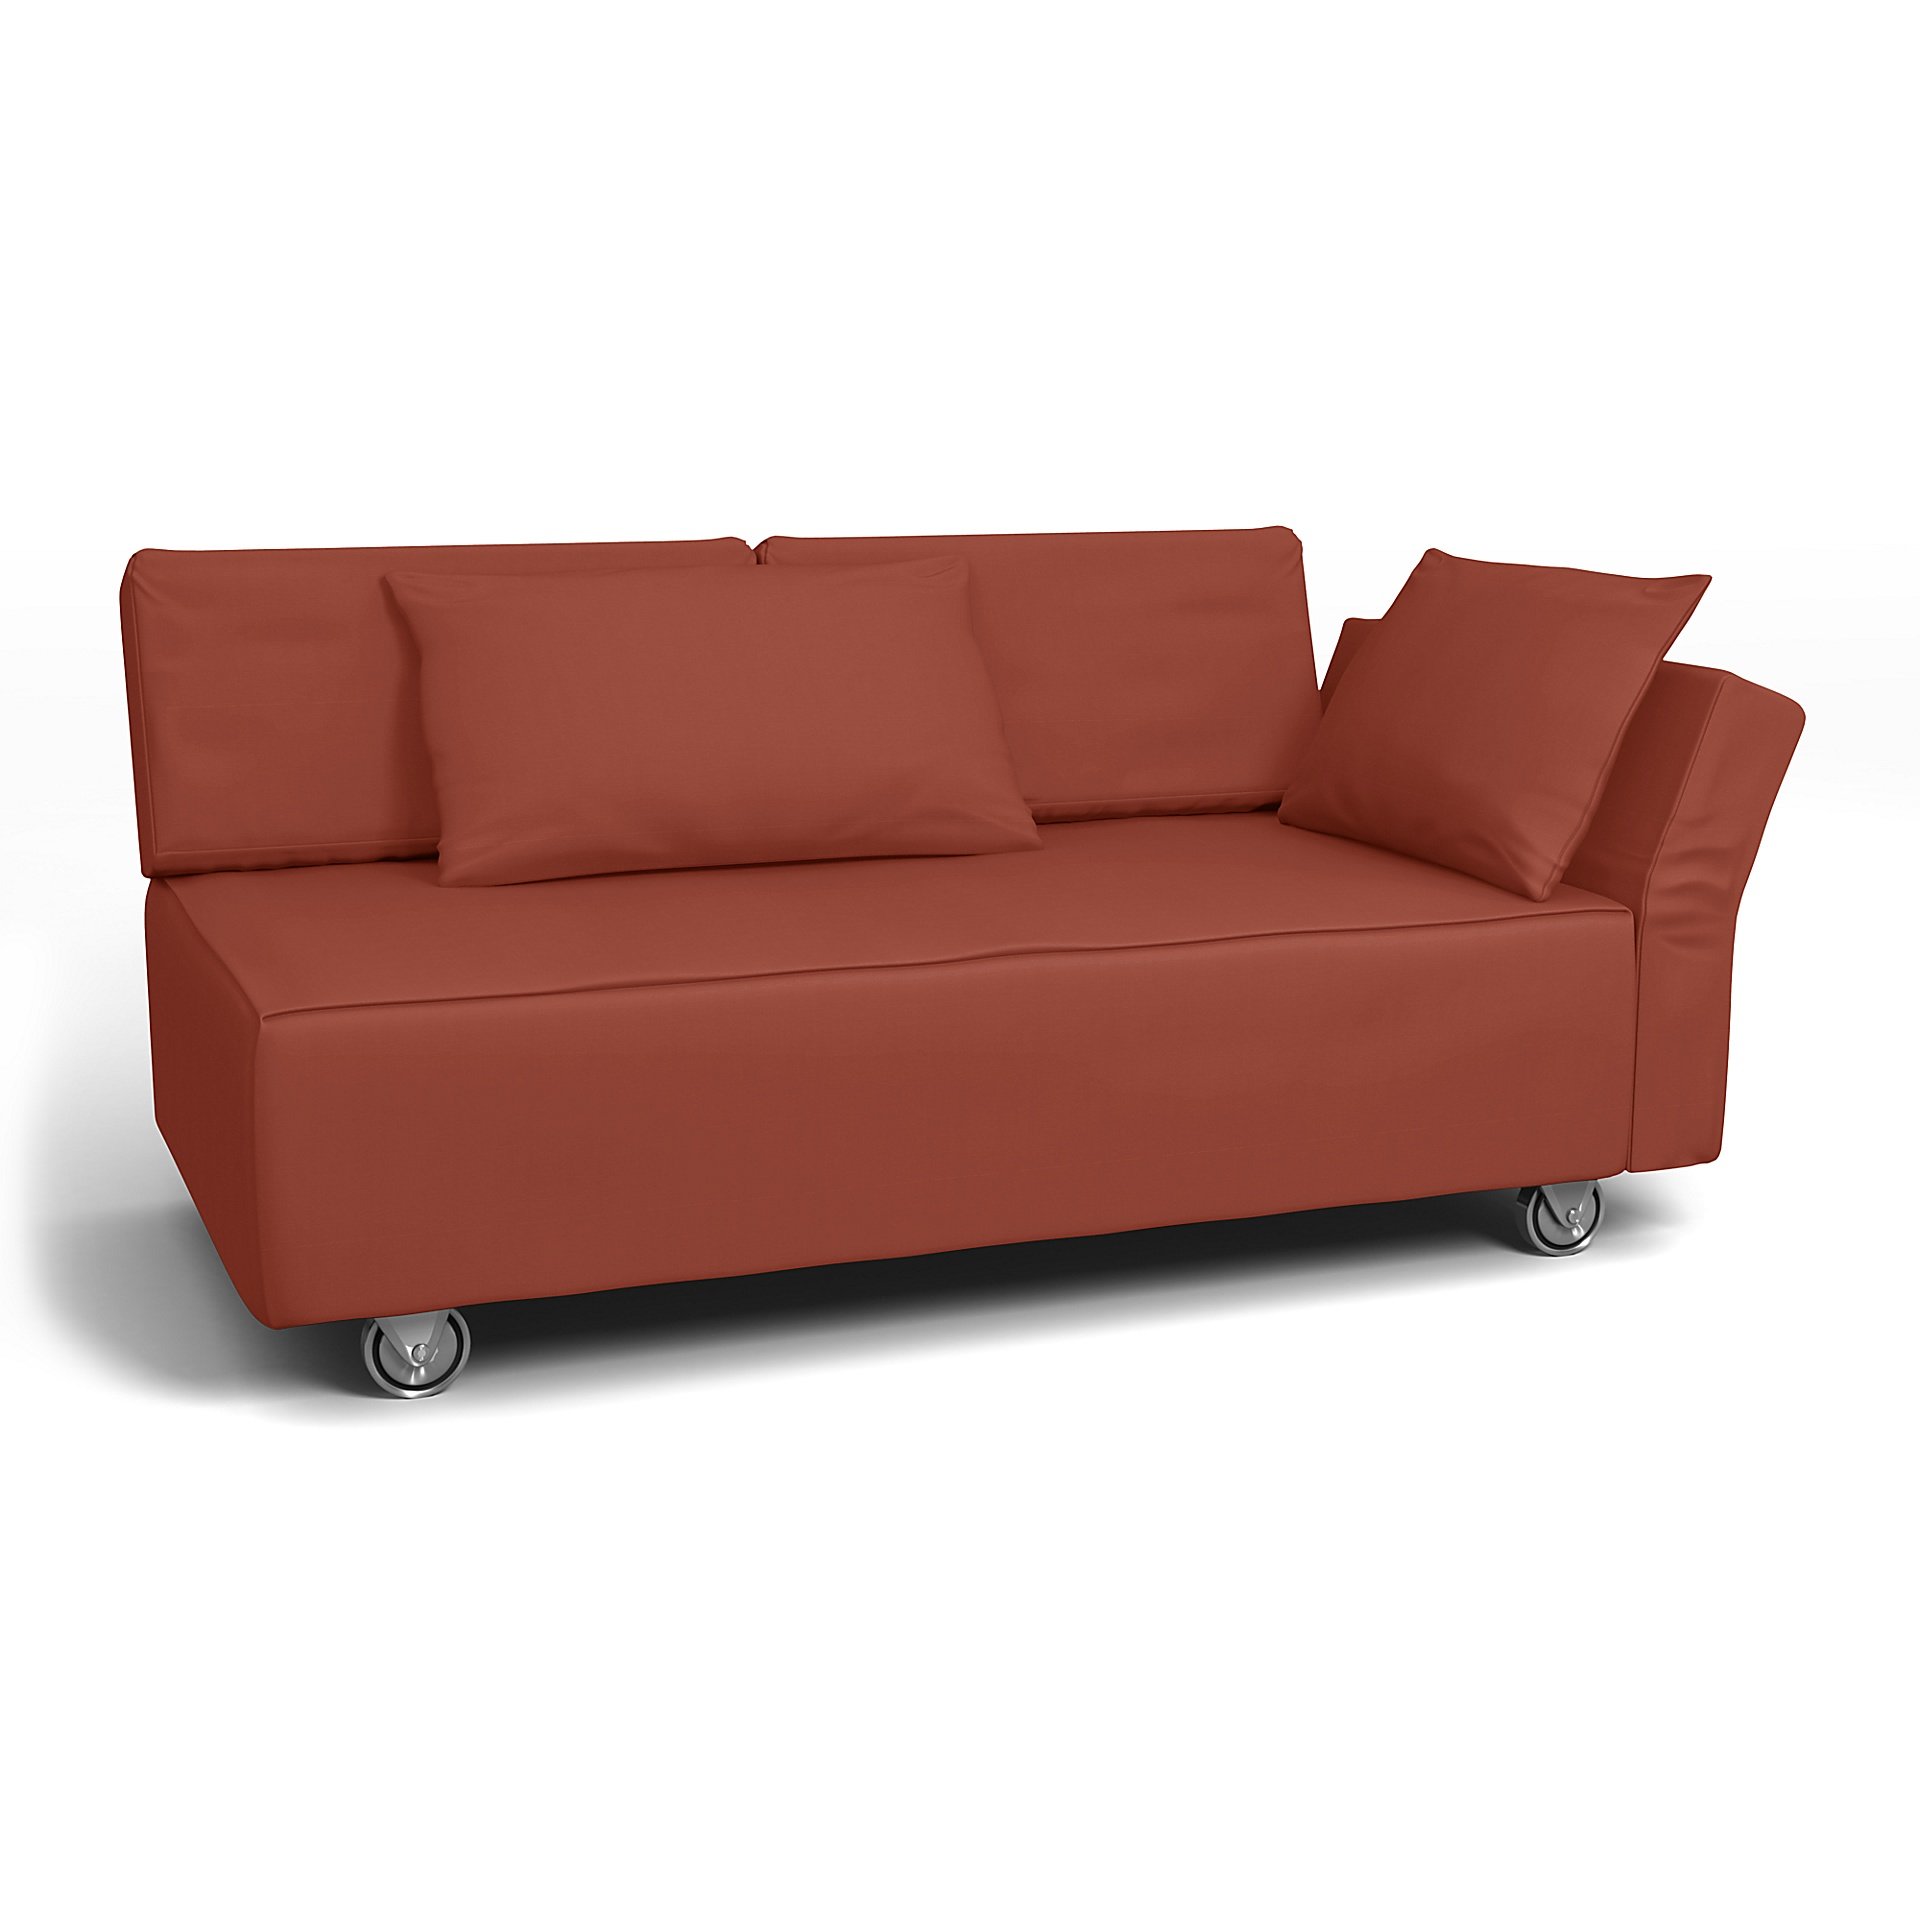 IKEA - Falsterbo 2 Seat Sofa with Right Arm Cover, Burnt Orange, Cotton - Bemz